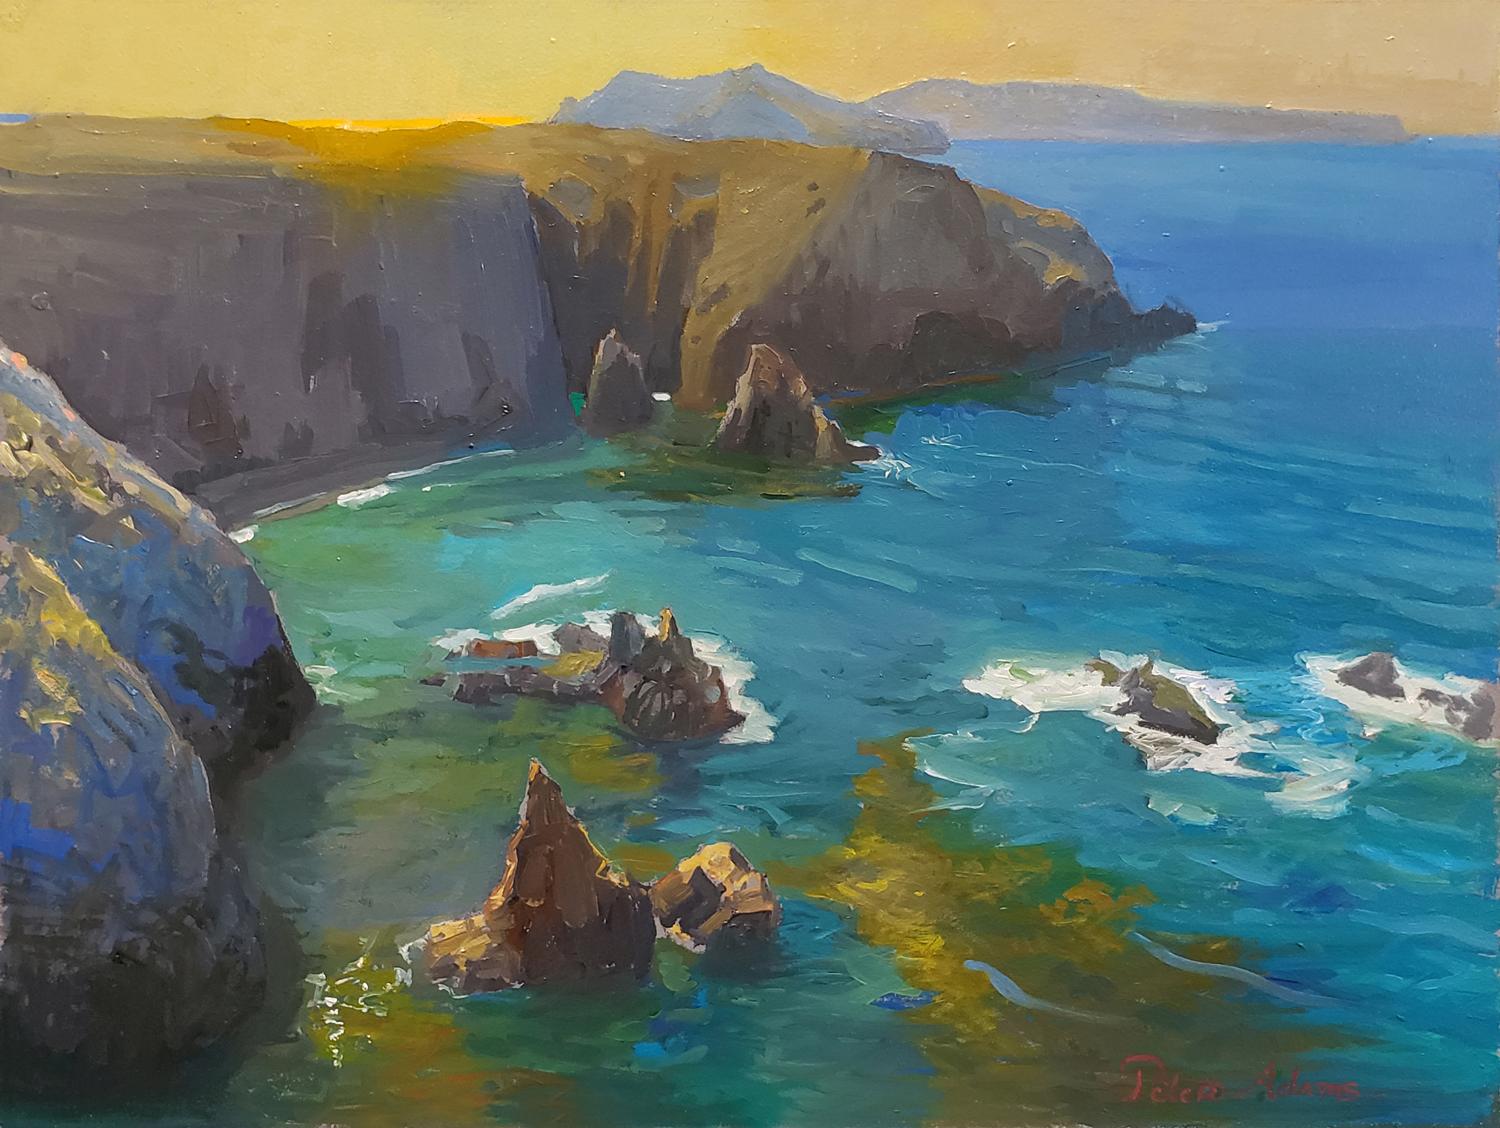 Afternoon Glow, Cathedral Cove, Anacapa Island - Painting by Peter Adams